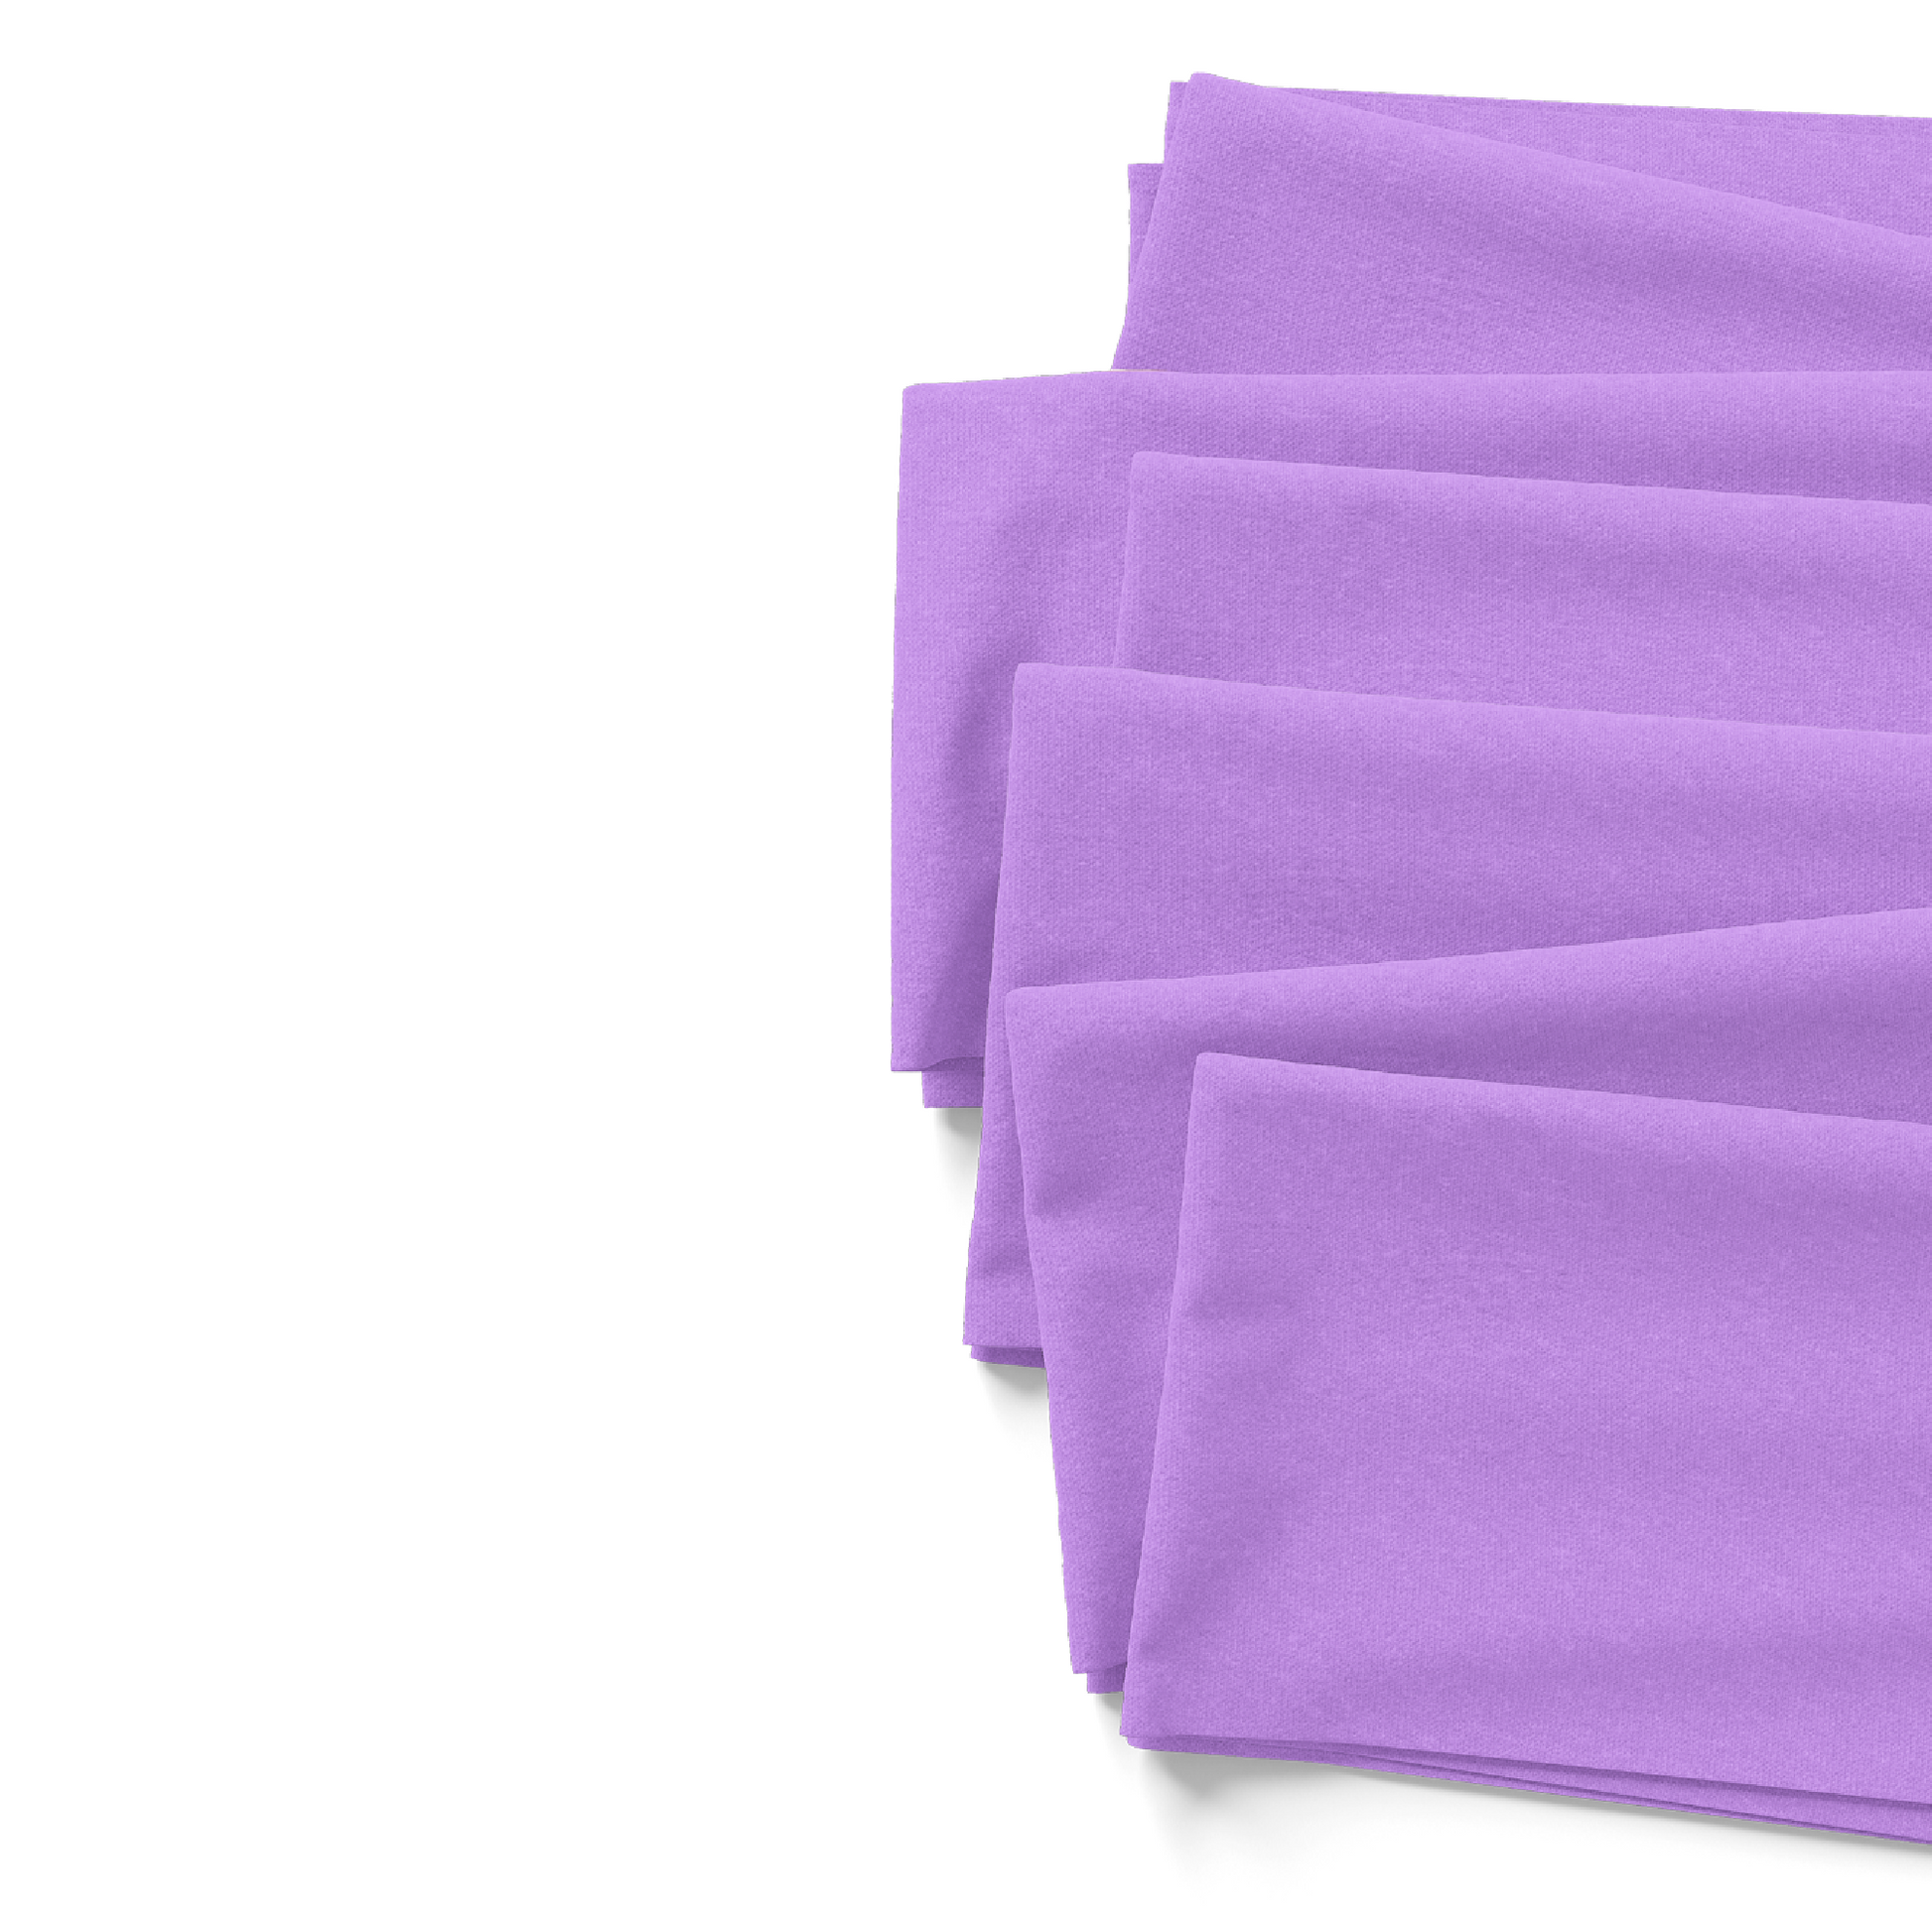 Liverpool, Ribbed, DBP, Polyester, and Neoprene solid Spring fabric by the yard in Lavender.